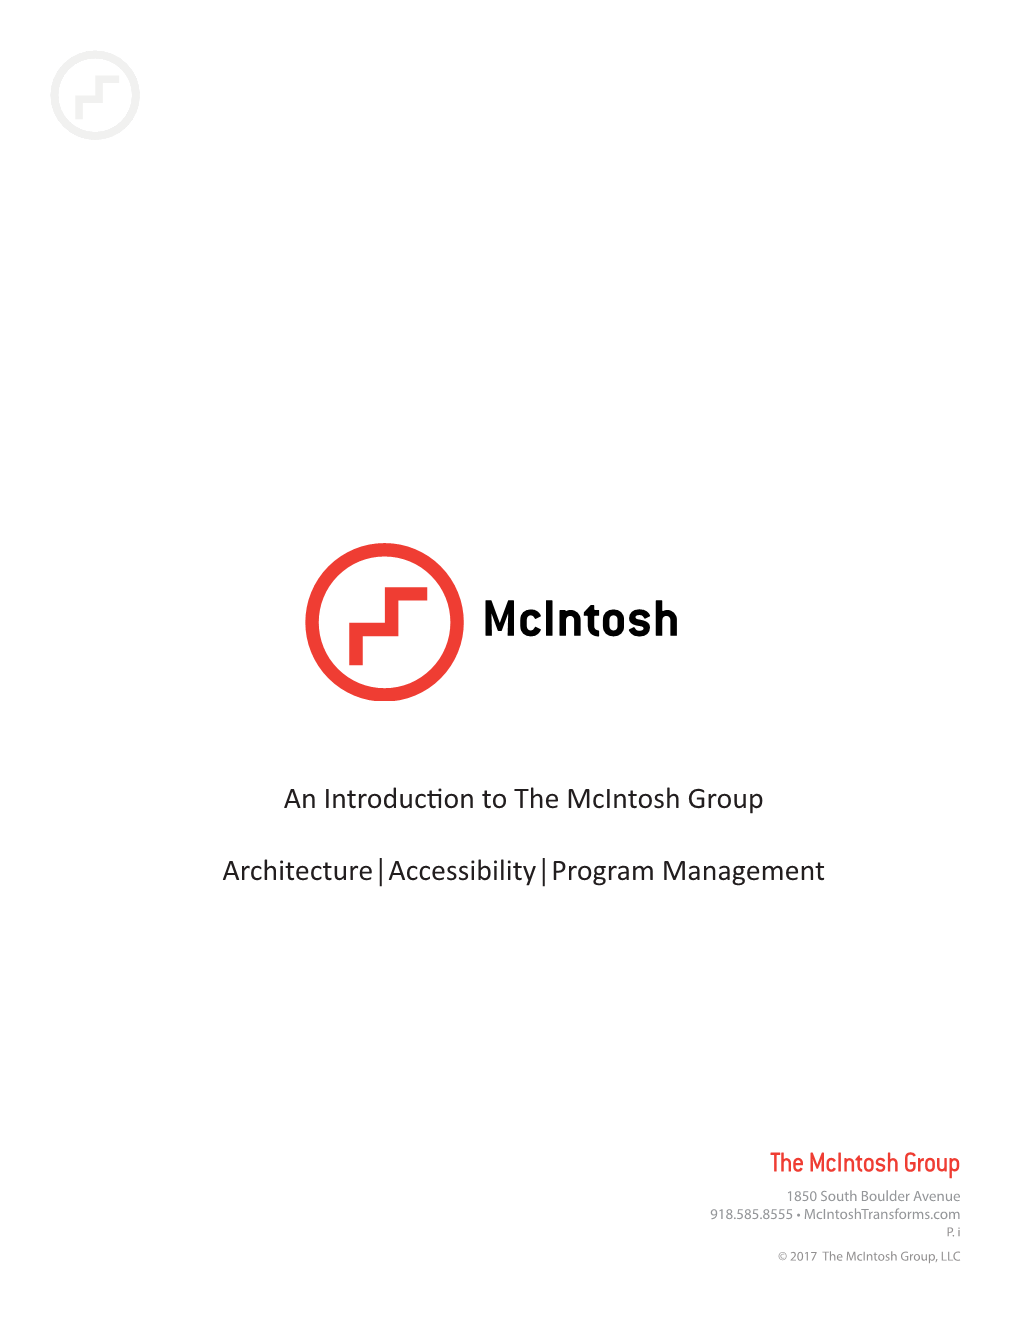 The Mcintosh Group an Introduction to the Mcintosh Group Architecture